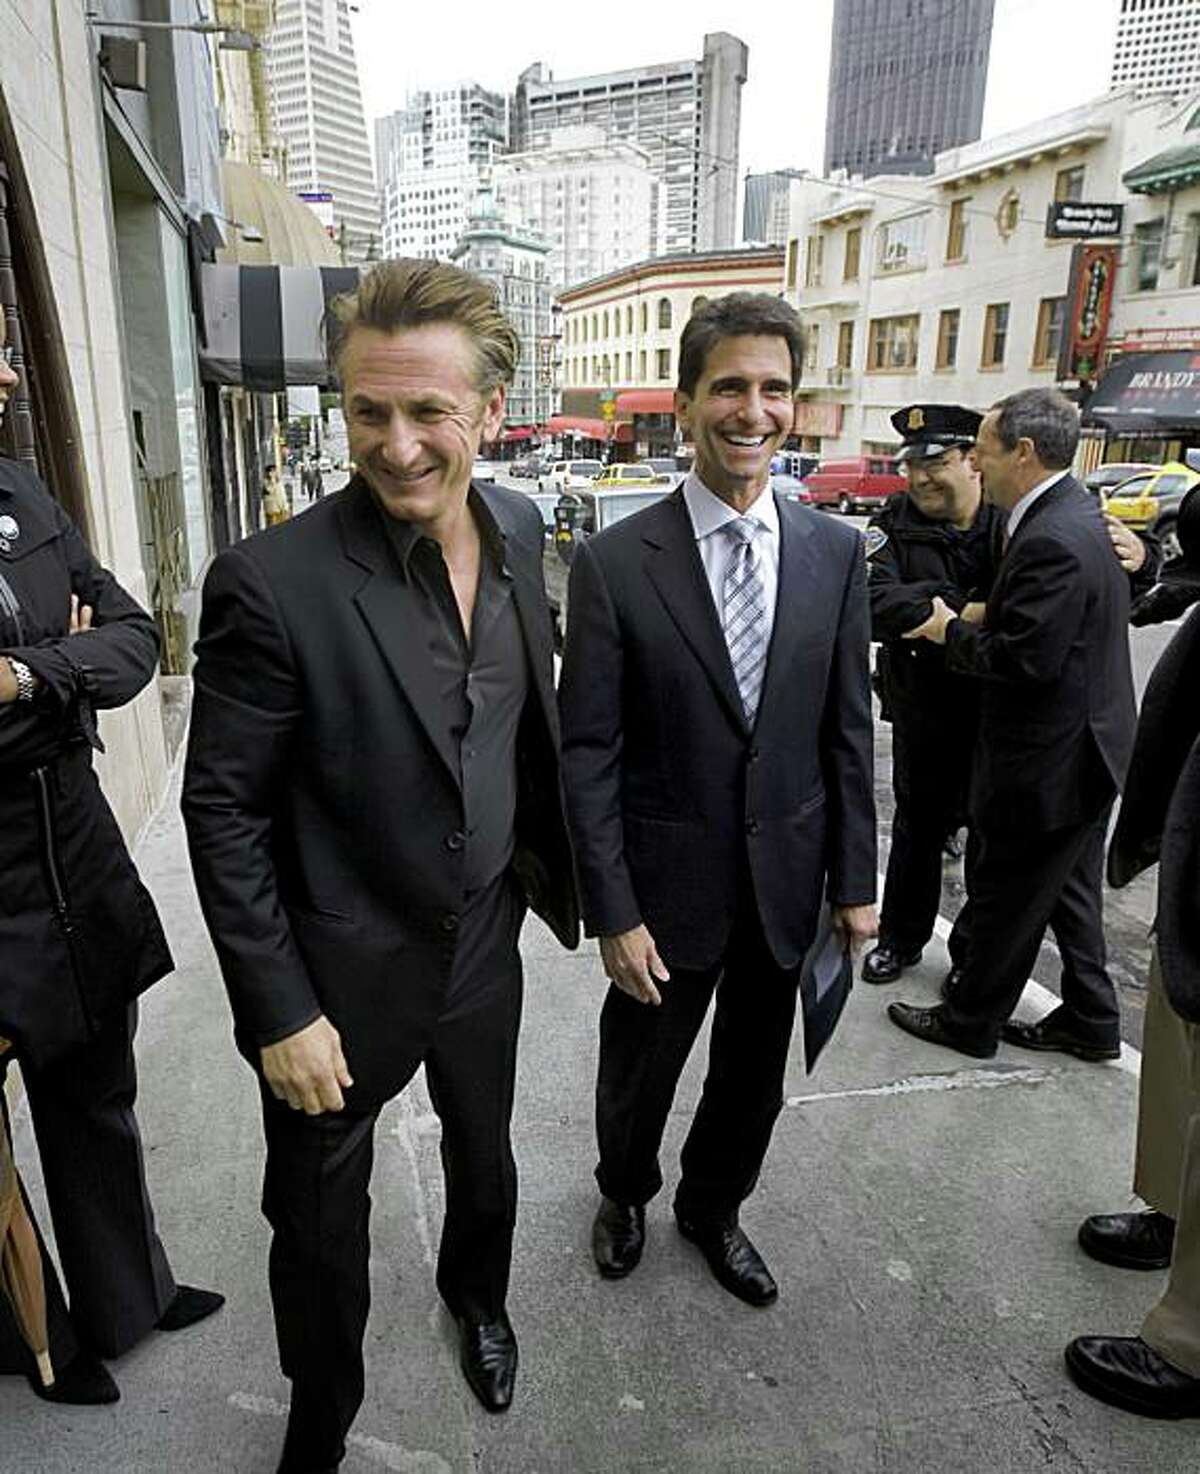 Actor Sean Penn, (L), who recently won an Academy Award for his portrayal of slain San Francisco Supervisor Harvey Milk, and California State Senator Mark Leno arrive at a press conference at Tosca Cafe in San Francsico, Calif., on Tuesday, Mar. 3, 2009, where they announced the reintroduction of California Senate Bill 572. The bill, authored by Leno, would designate May 22 as Harvey Milk Day.